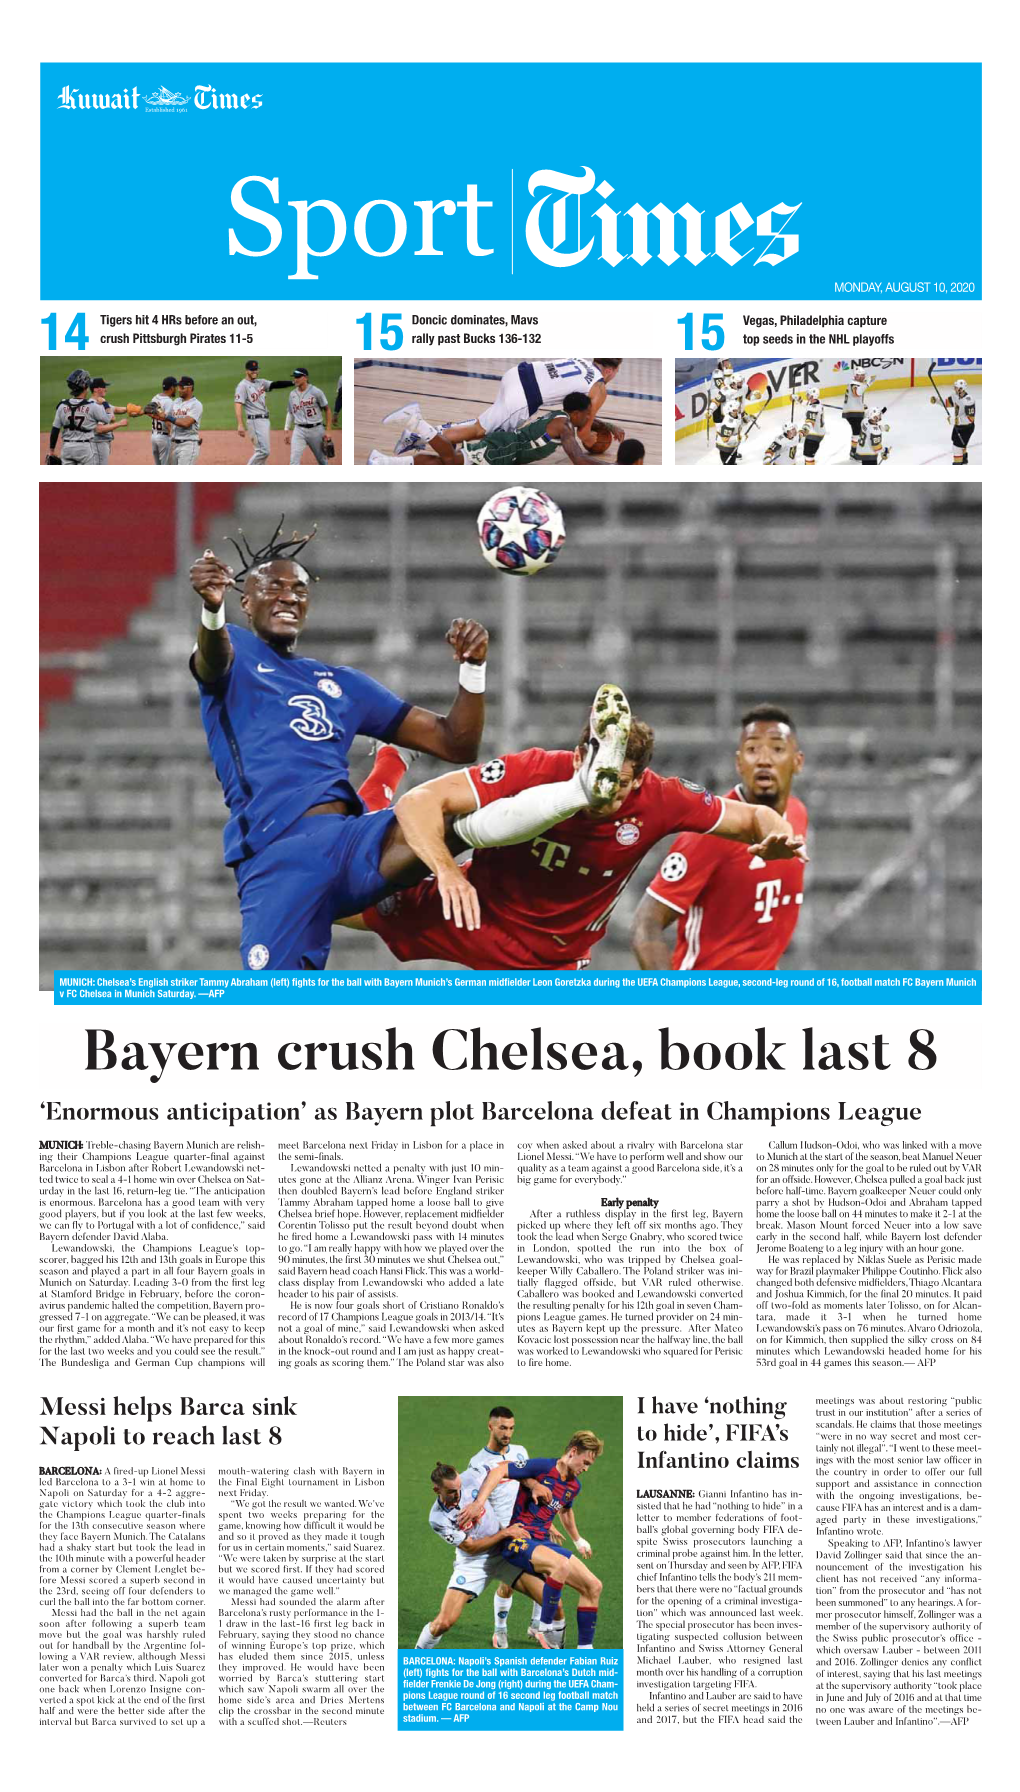 Bayern Crush Chelsea, Book Last 8 ‘Enormous Anticipation’ As Bayern Plot Barcelona Defeat in Champions League